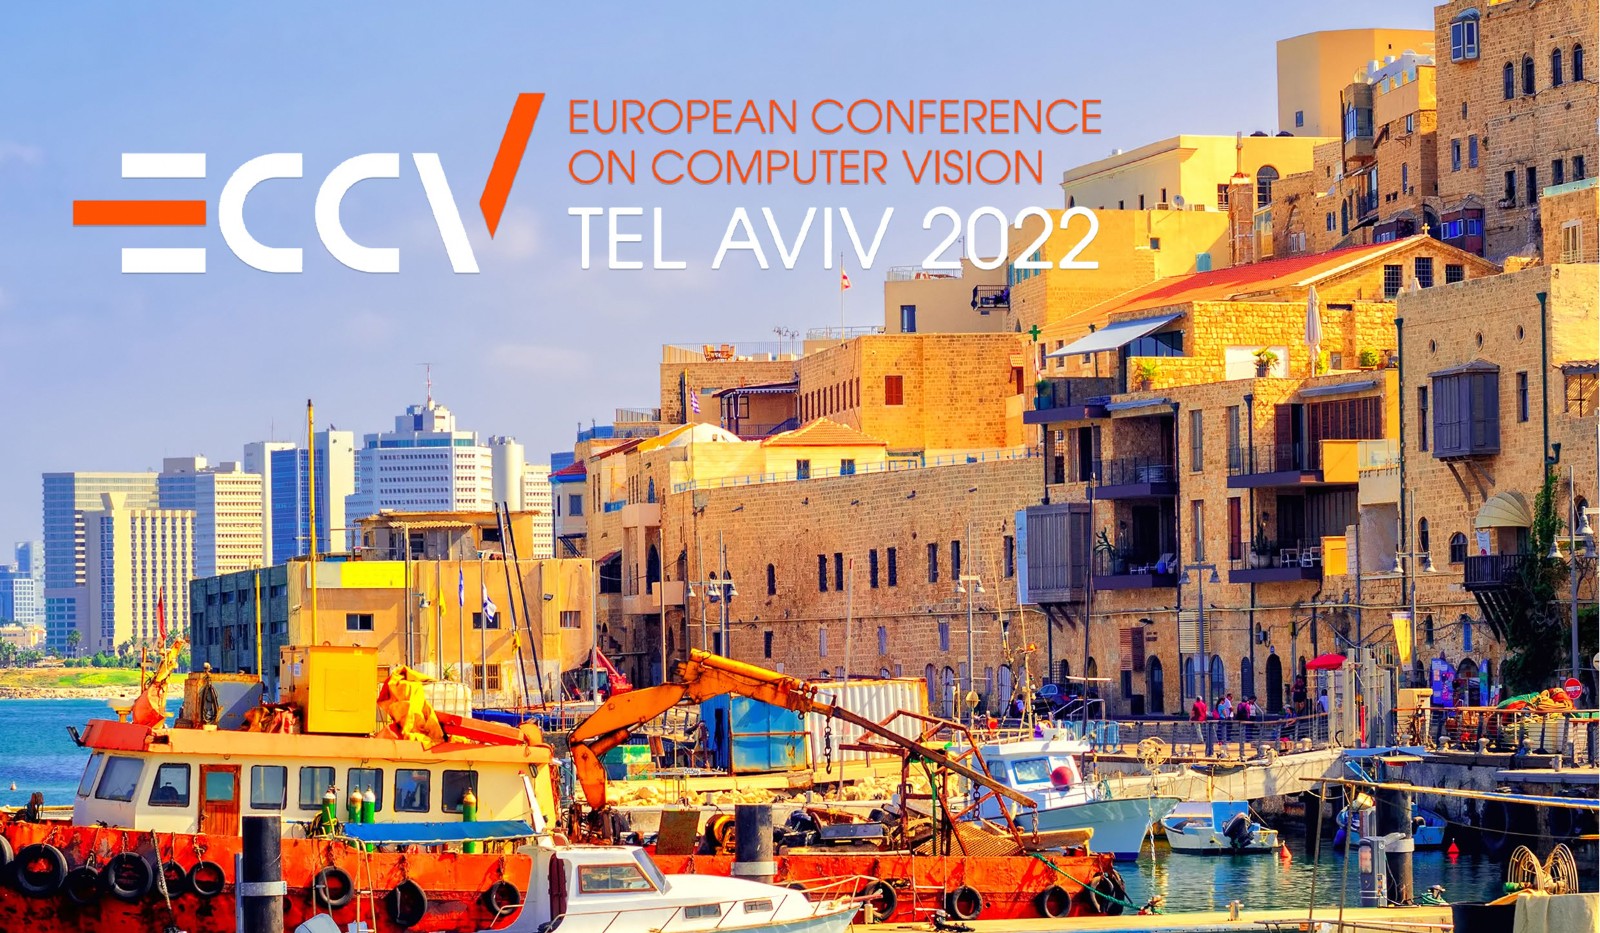 SenseTime Has 70 Papers Accepted at ECCV 2022, Continues to Take the